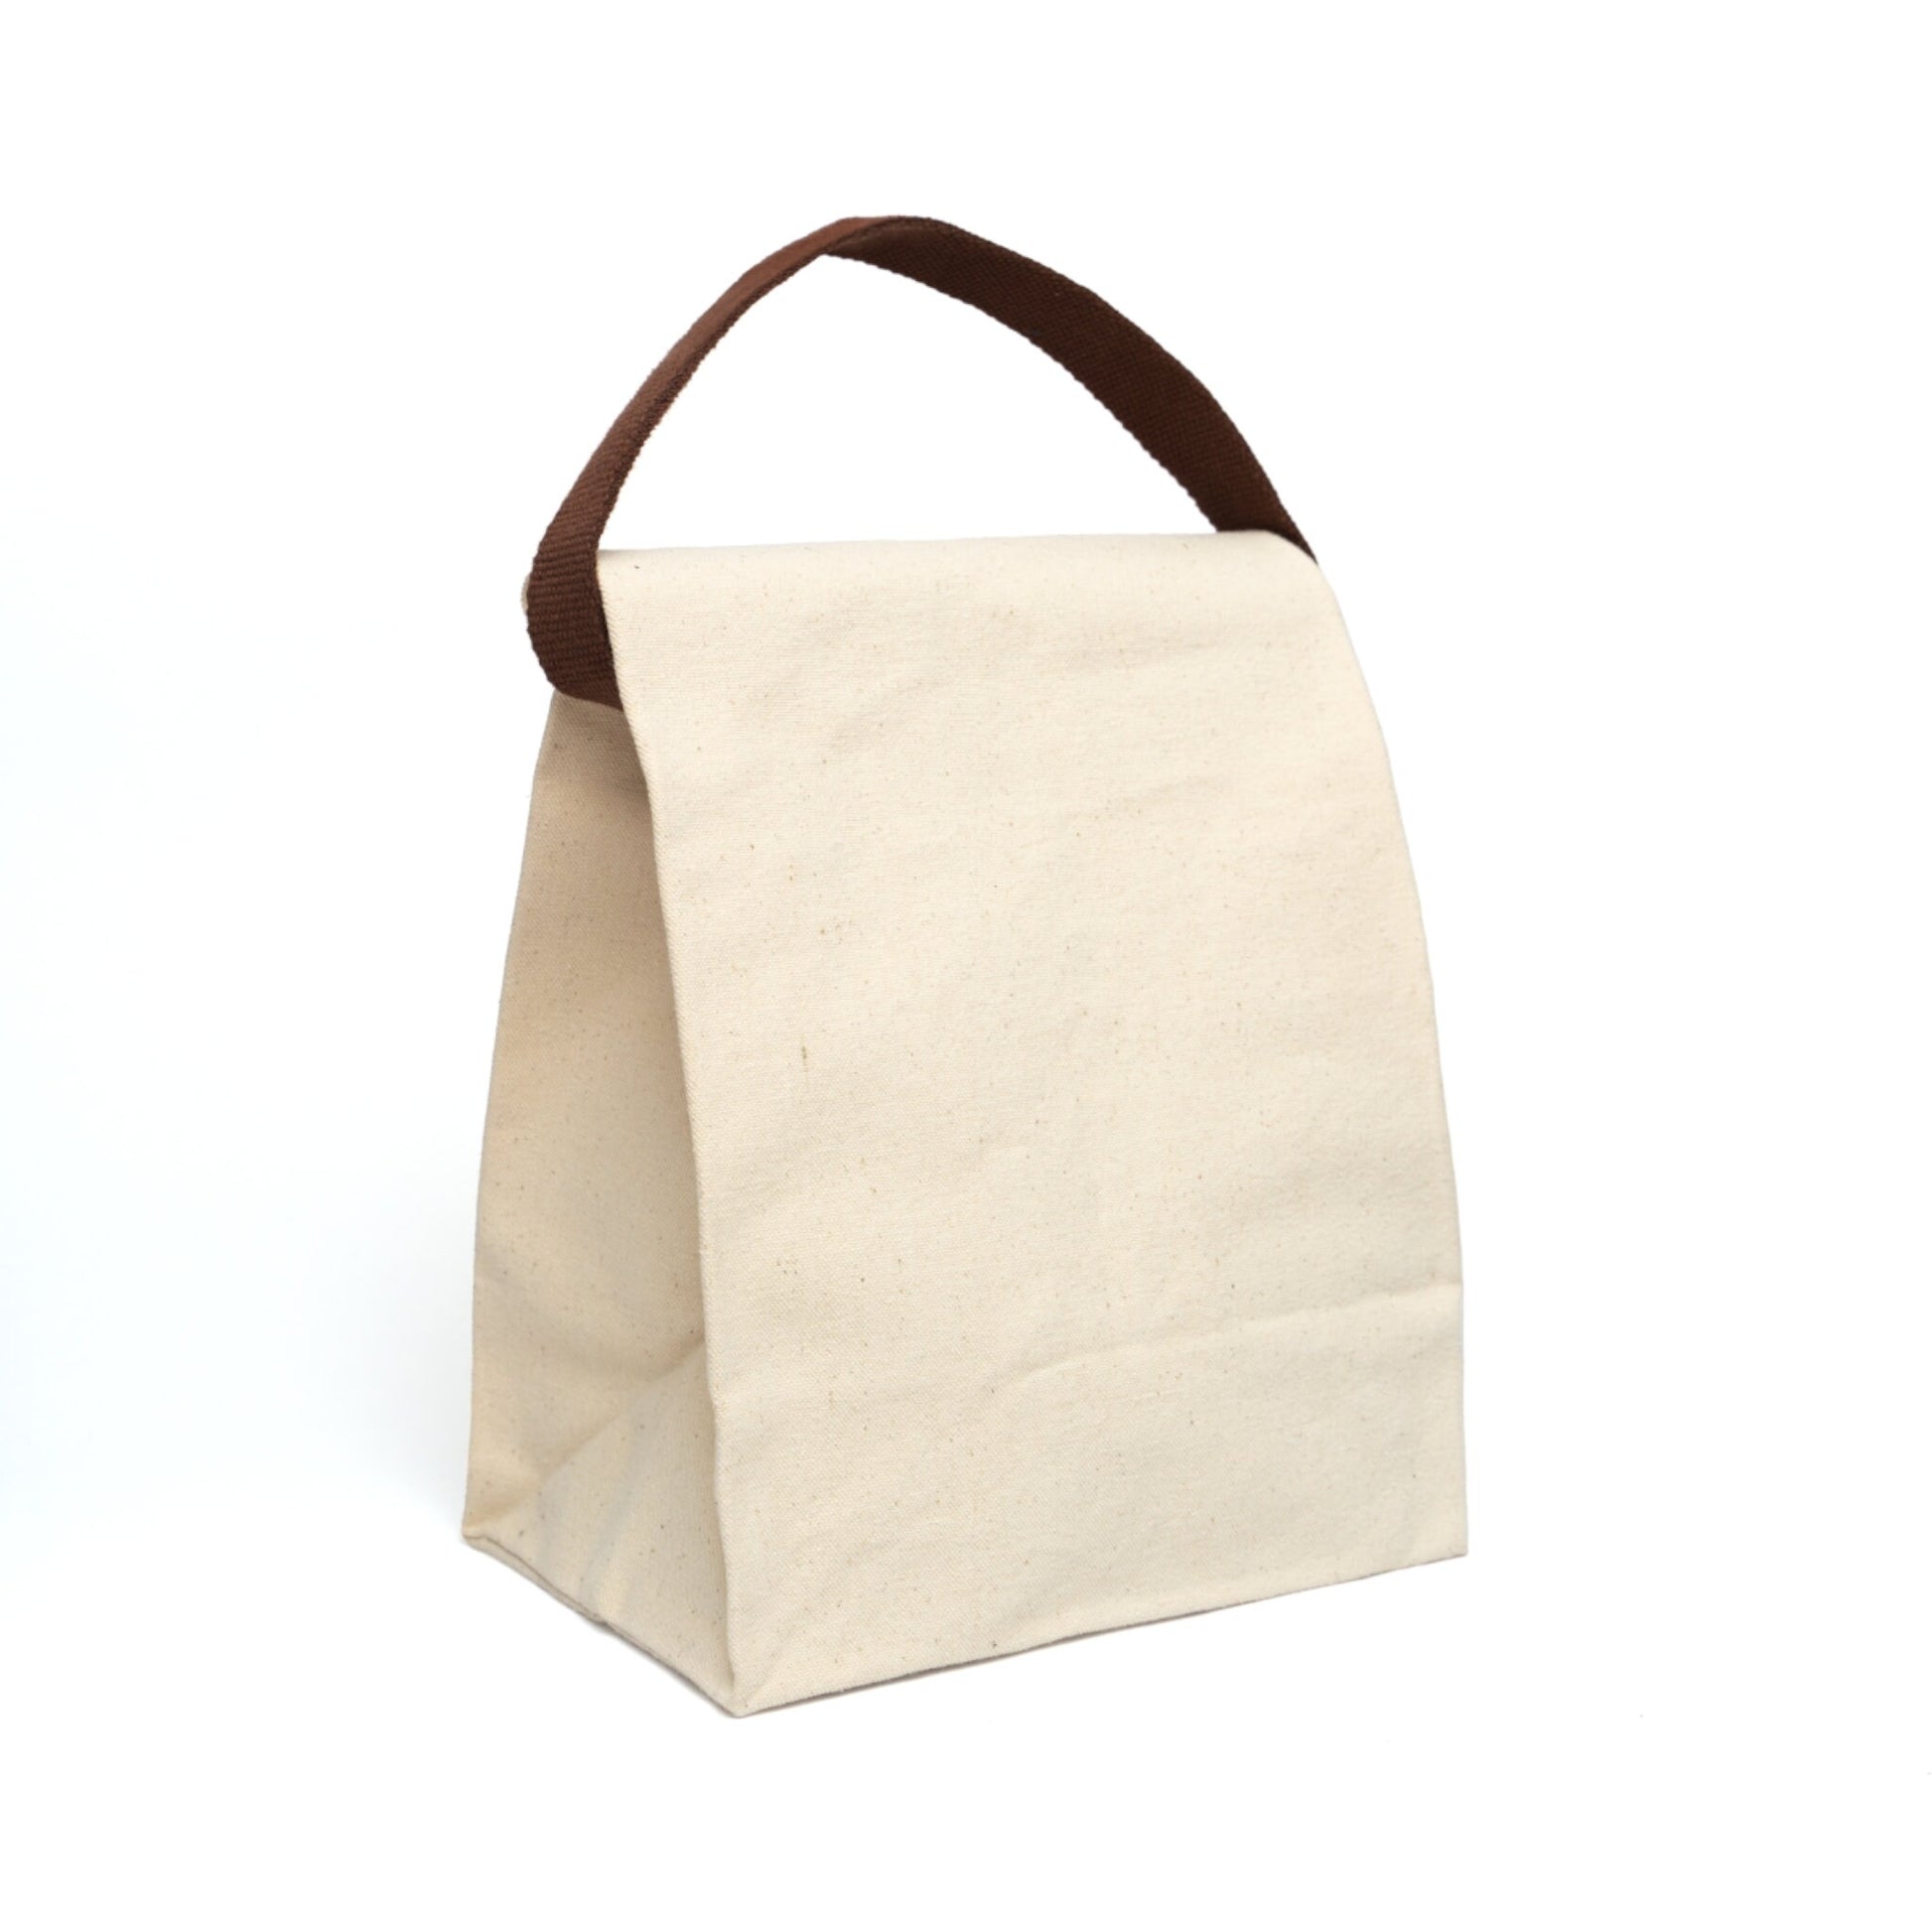 a white bag with a brown handle on a white background